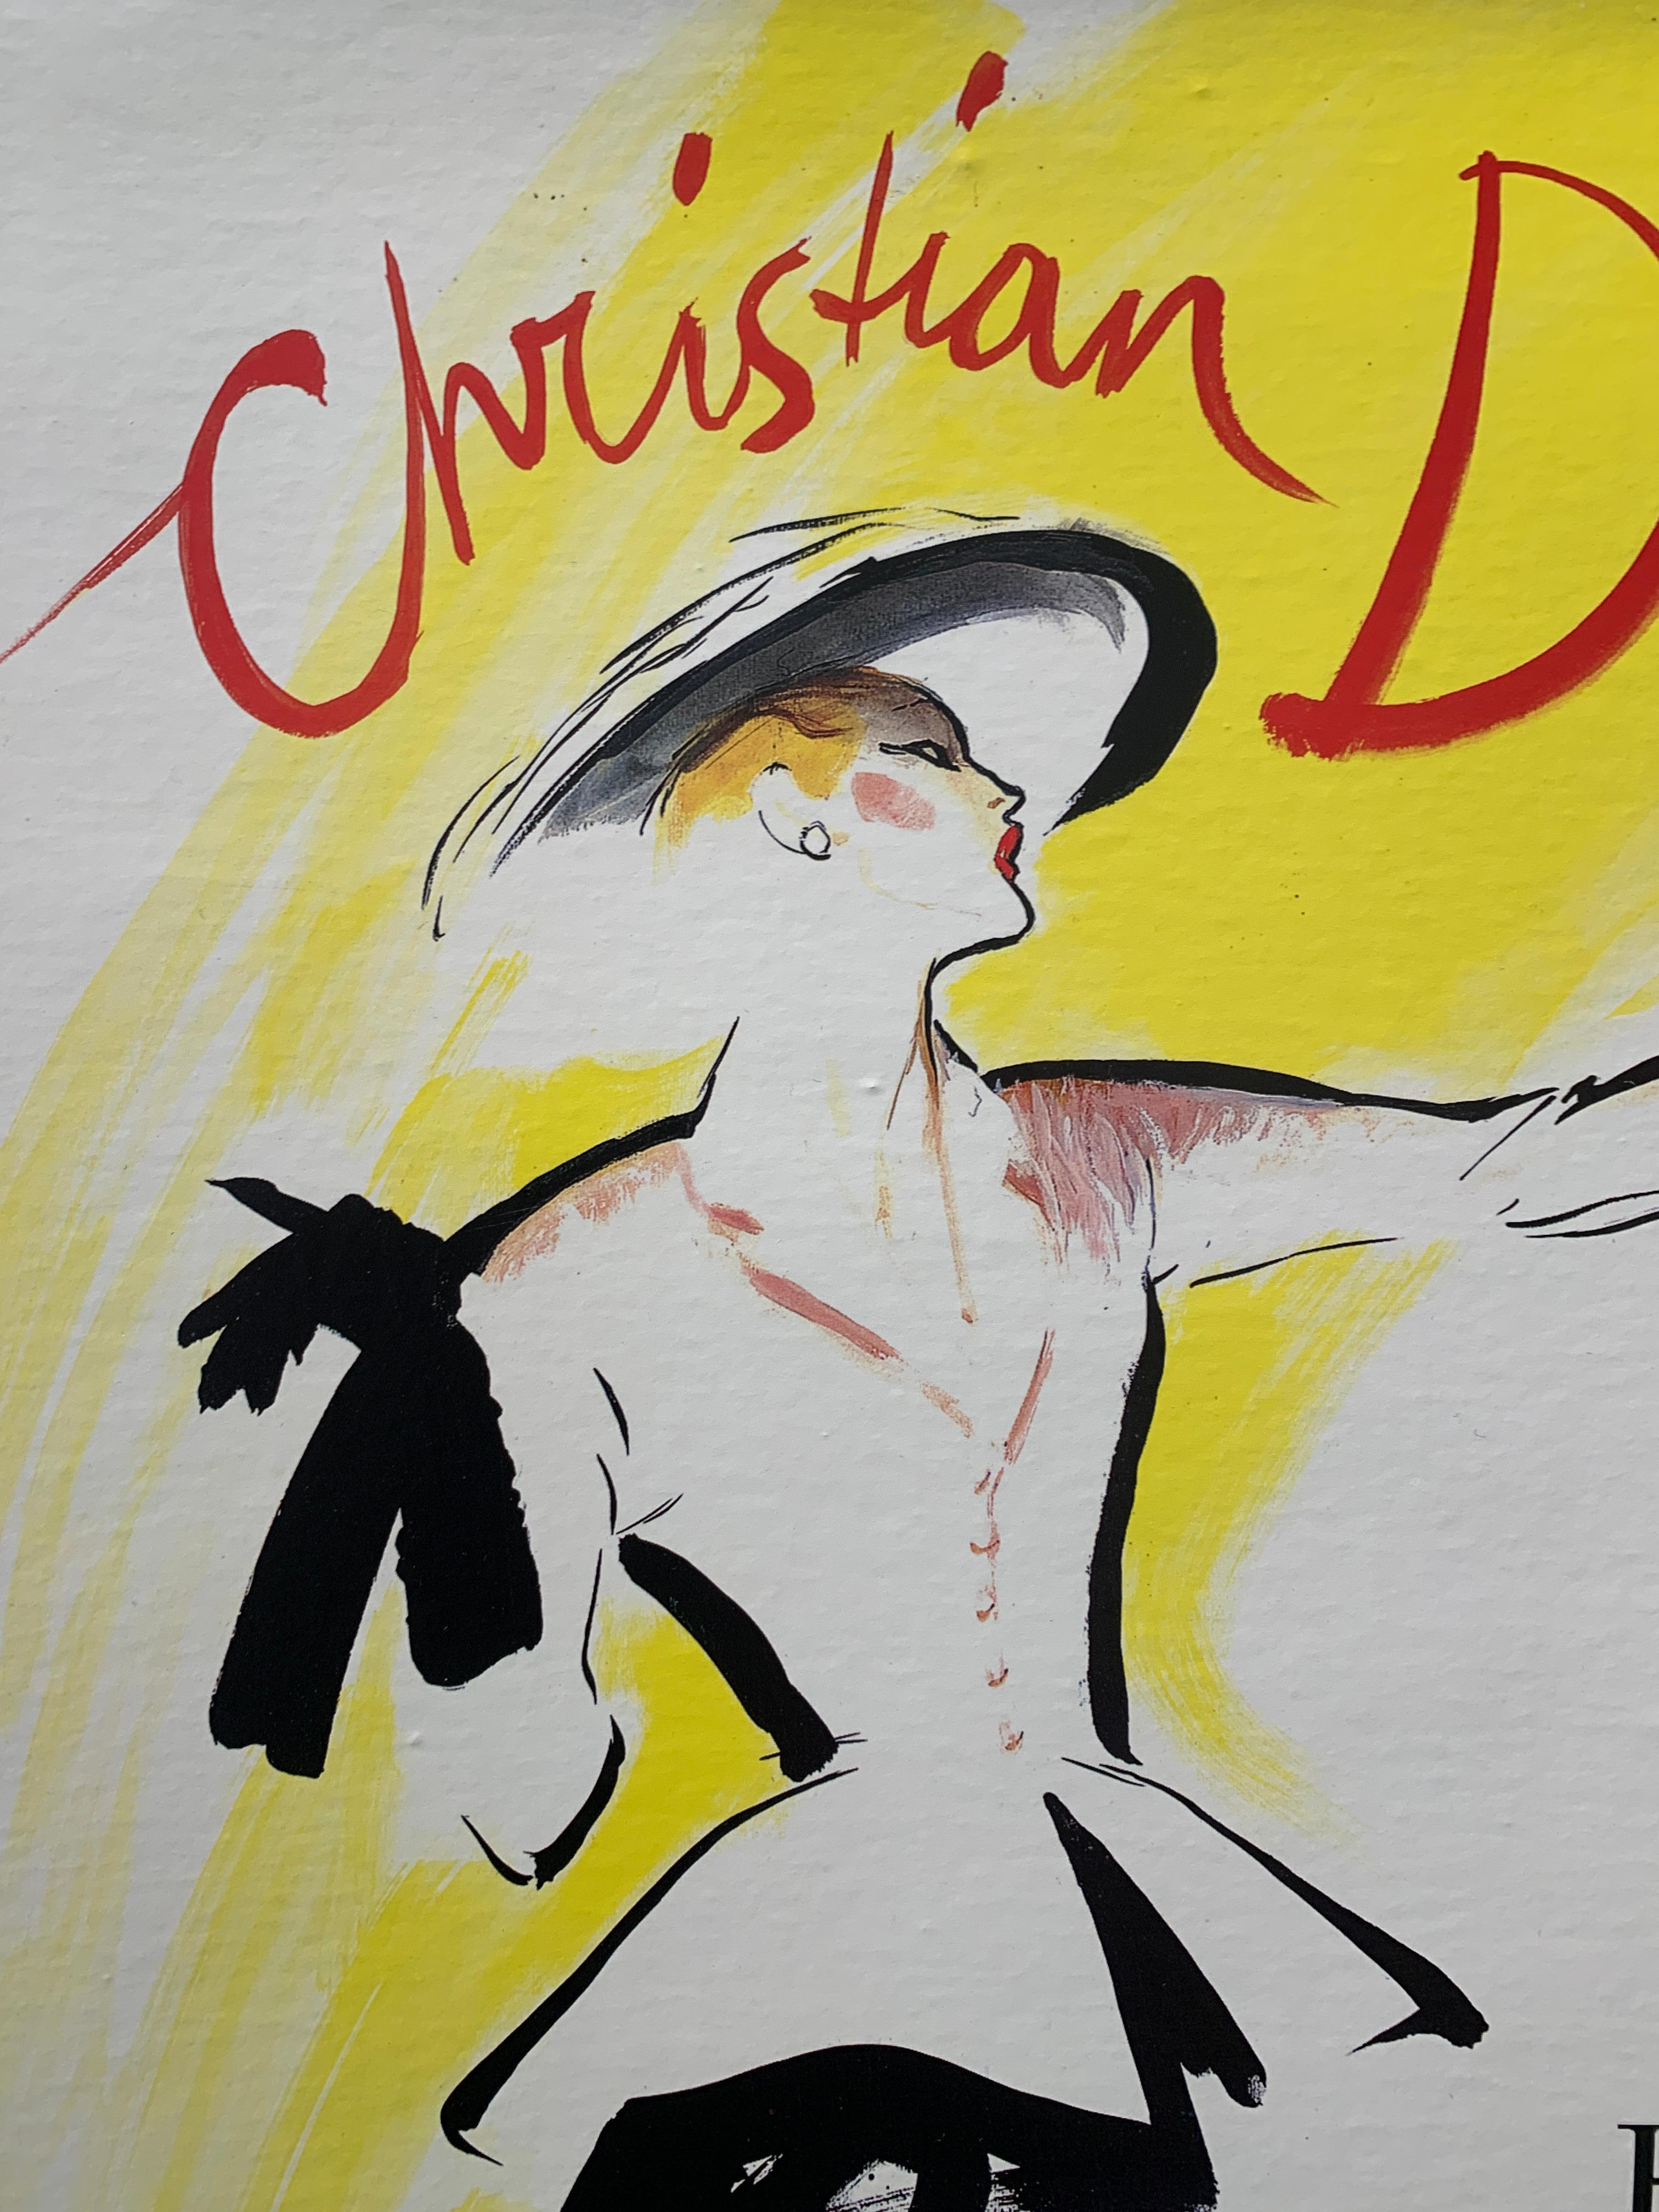 Original Vintage Poster Christian Dior by Rene Gruau, 1987 In Excellent Condition For Sale In Melbourne, Victoria